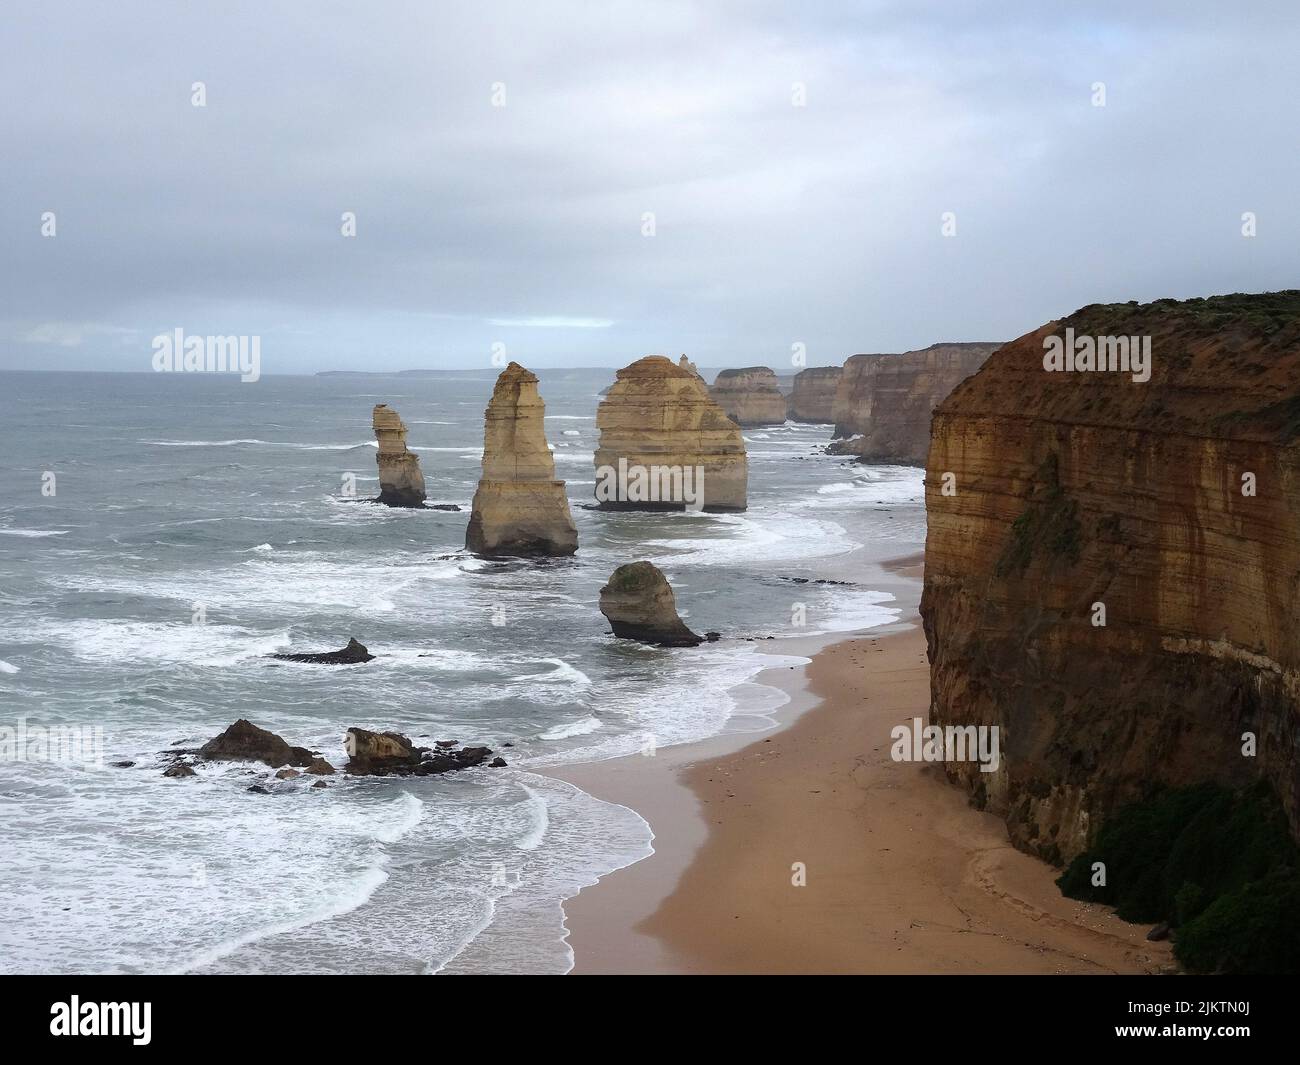 The 12 Apostles limestone stacks off the shore by the Great Oceans Road, Australia Stock Photo